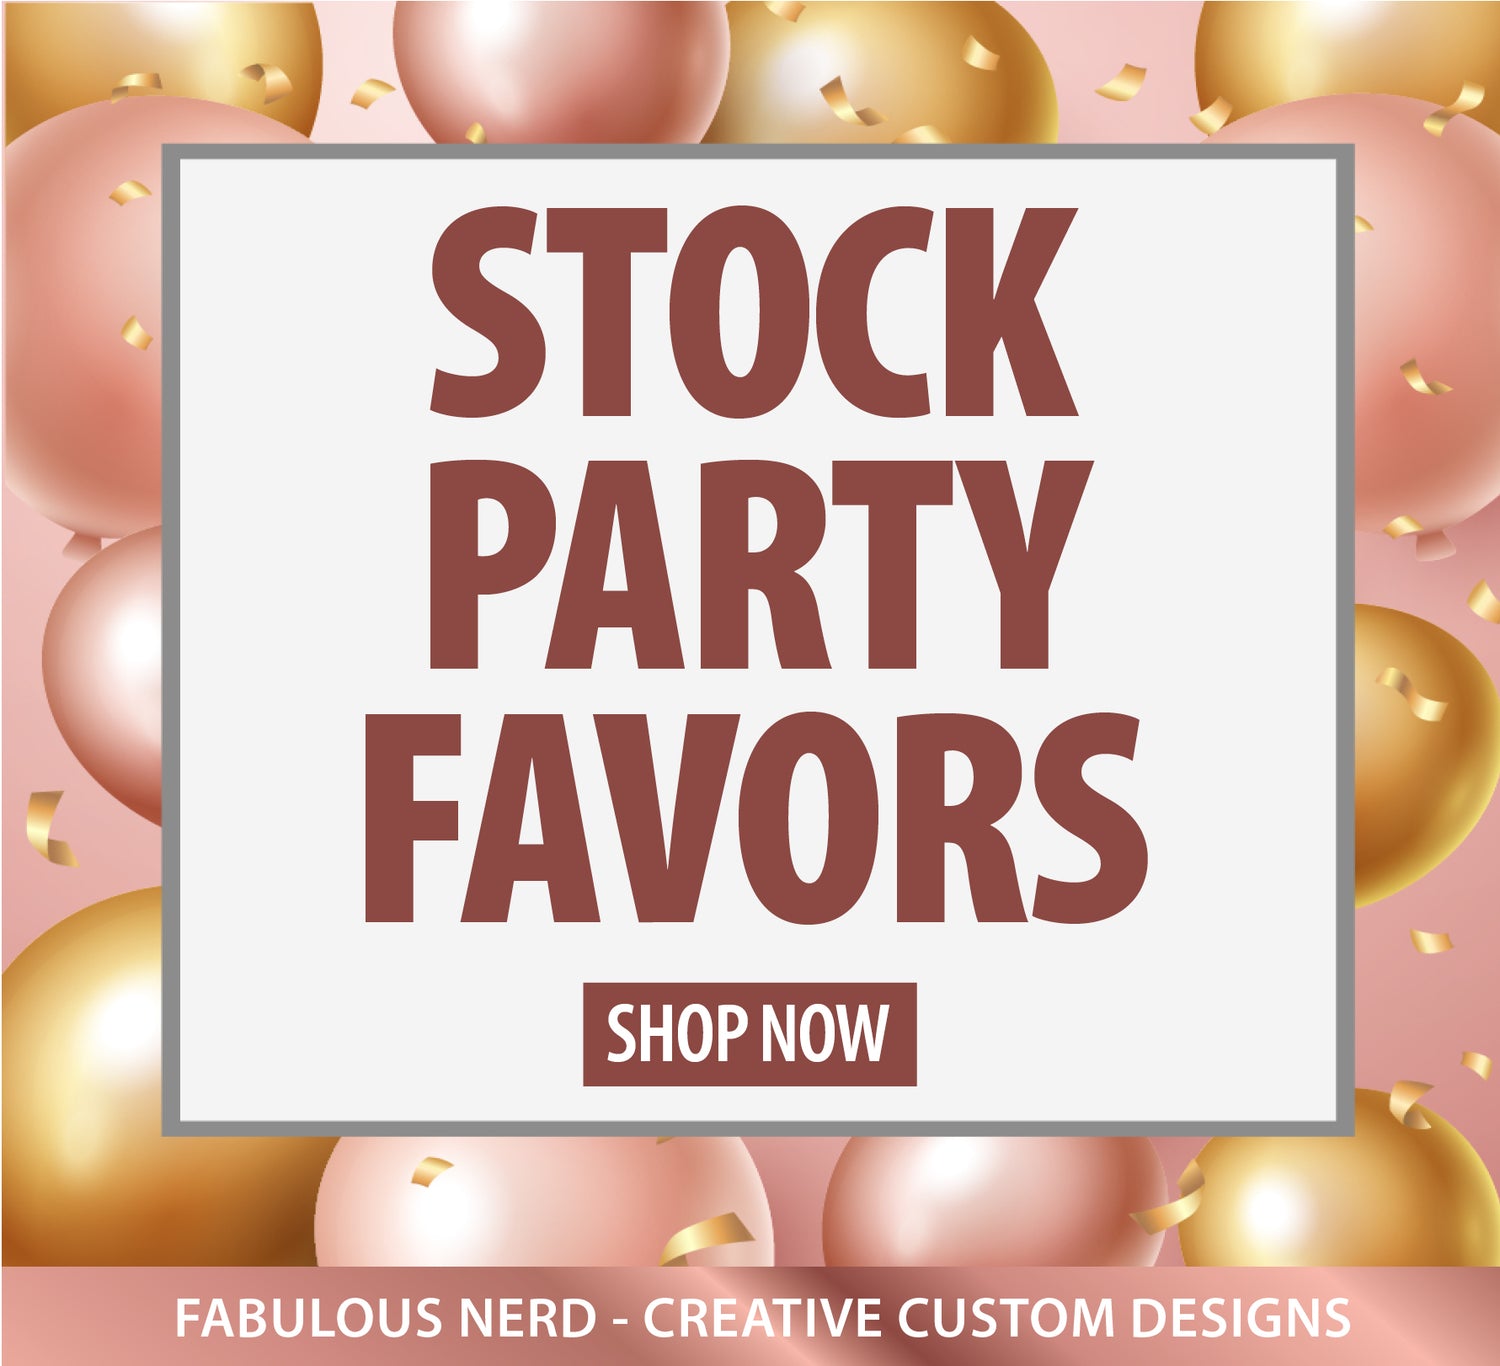 STOCK PARTY FAVORS (Customizable)